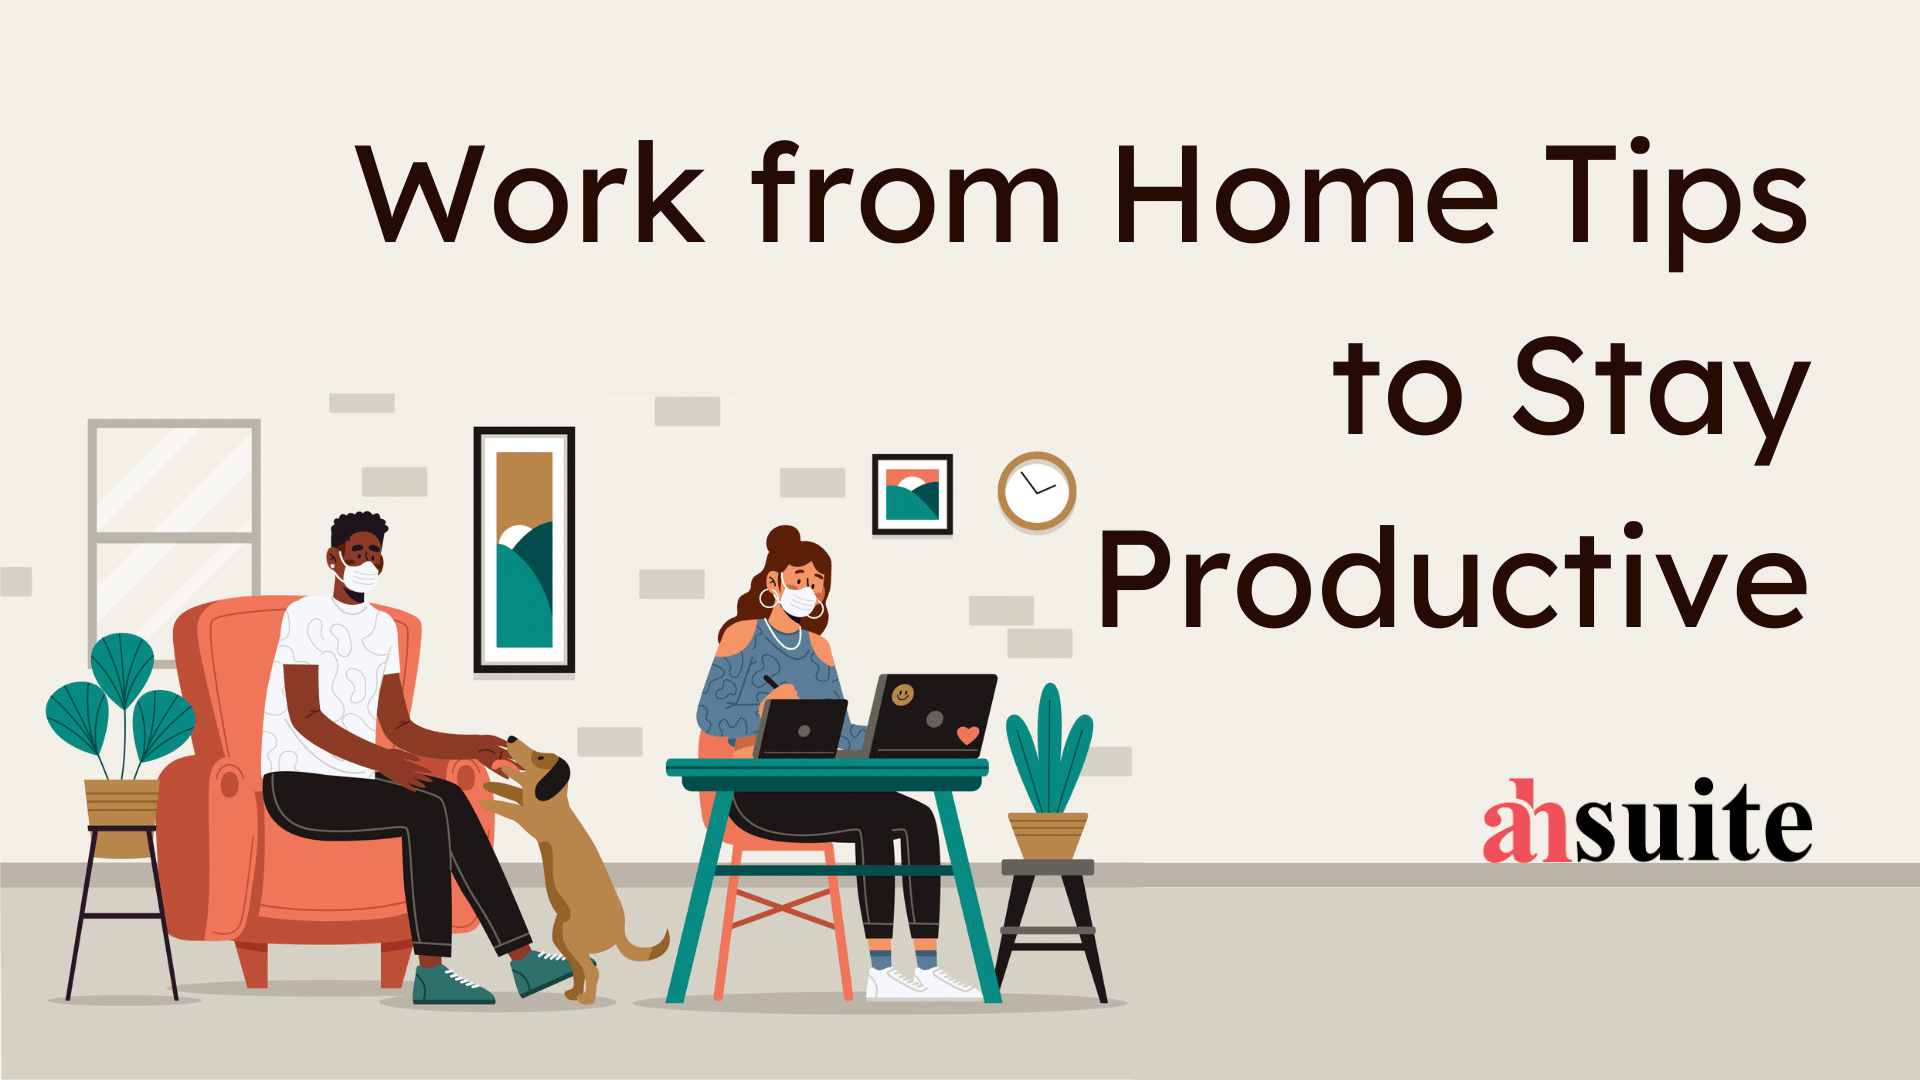 Work from Home Tips to Stay Productive